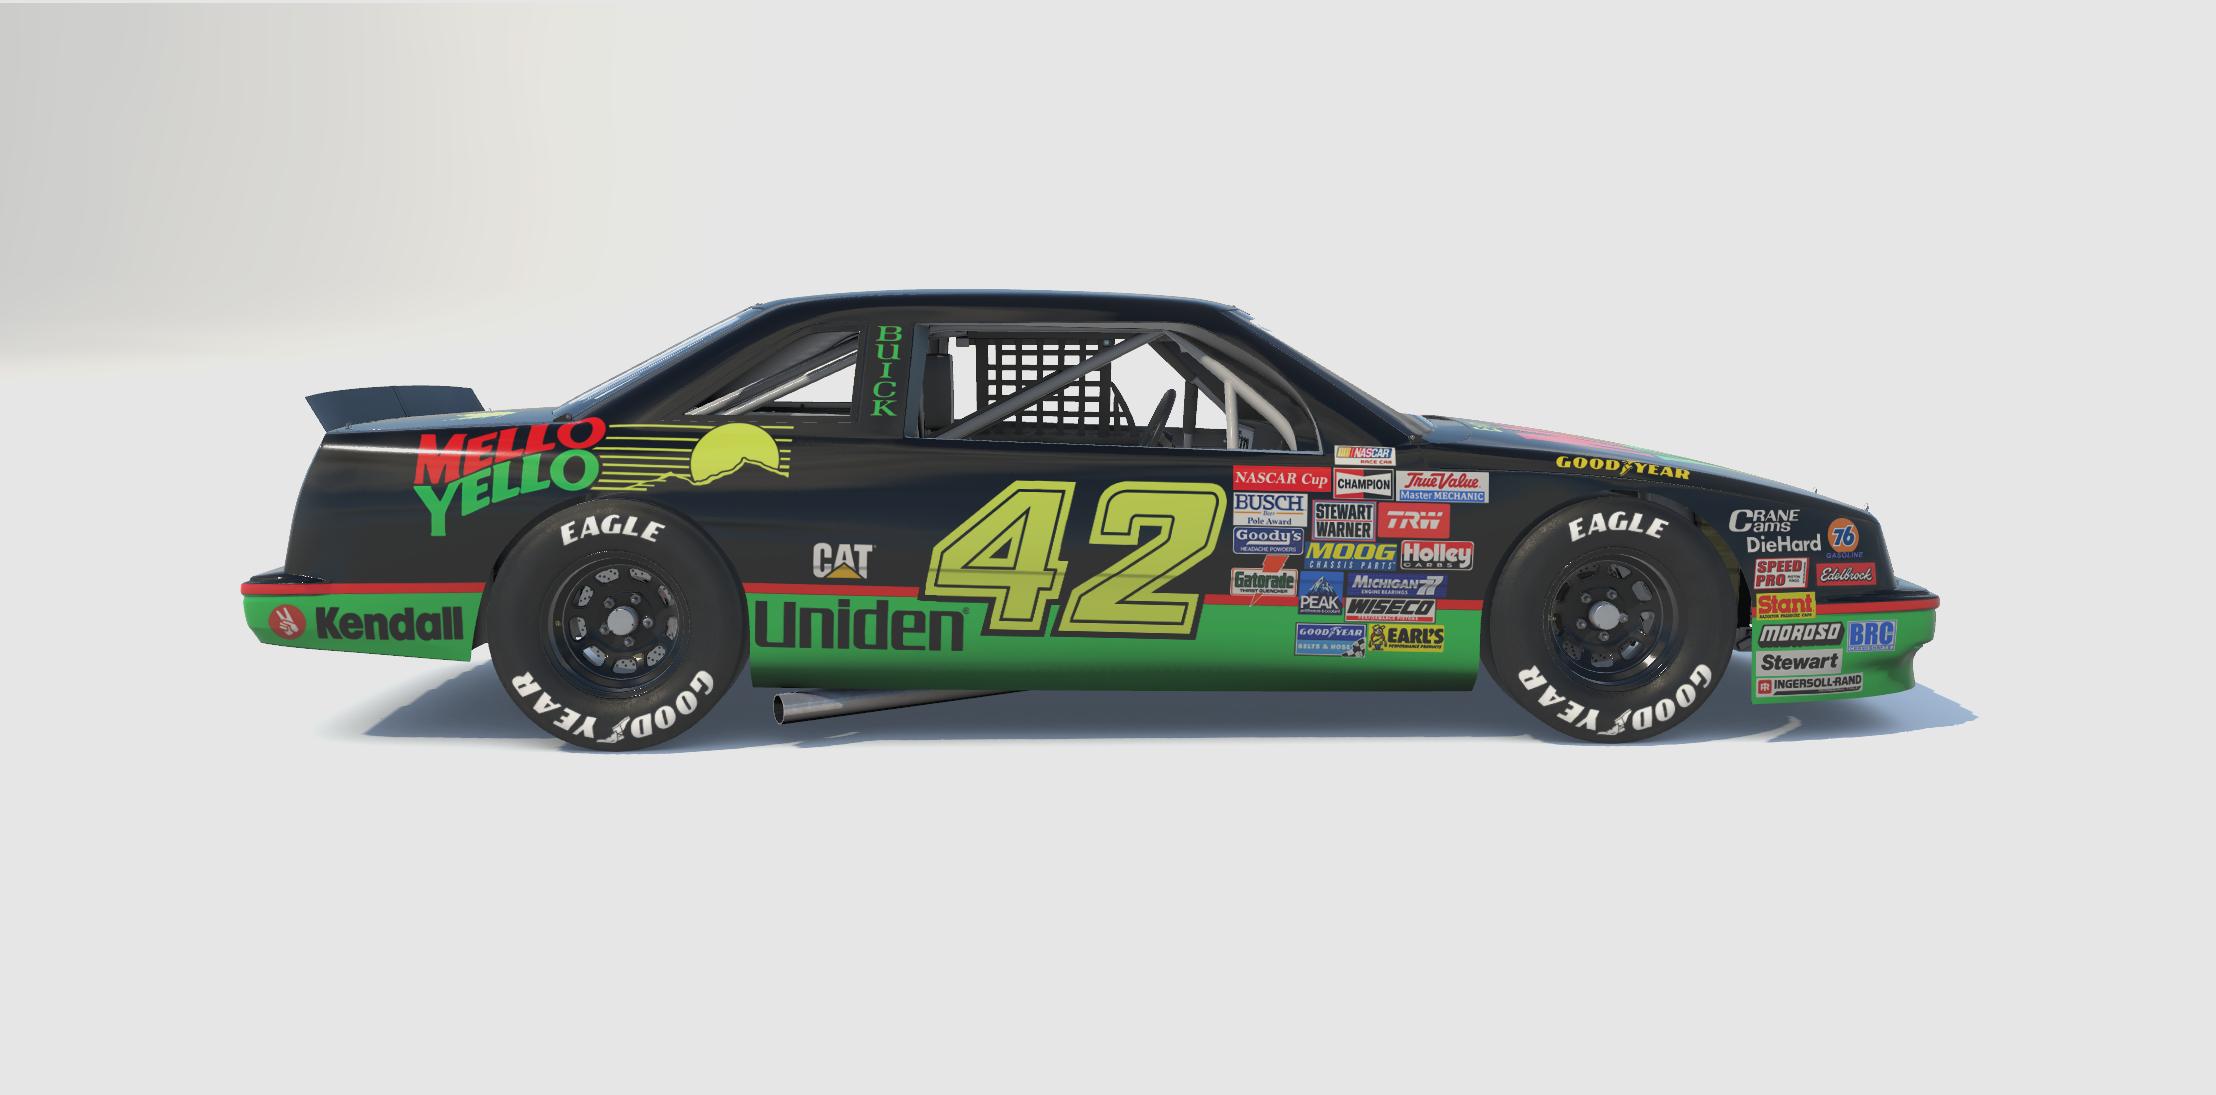 Preview of Fictional #42 Mello Yello Buick by Dustin Winegardner